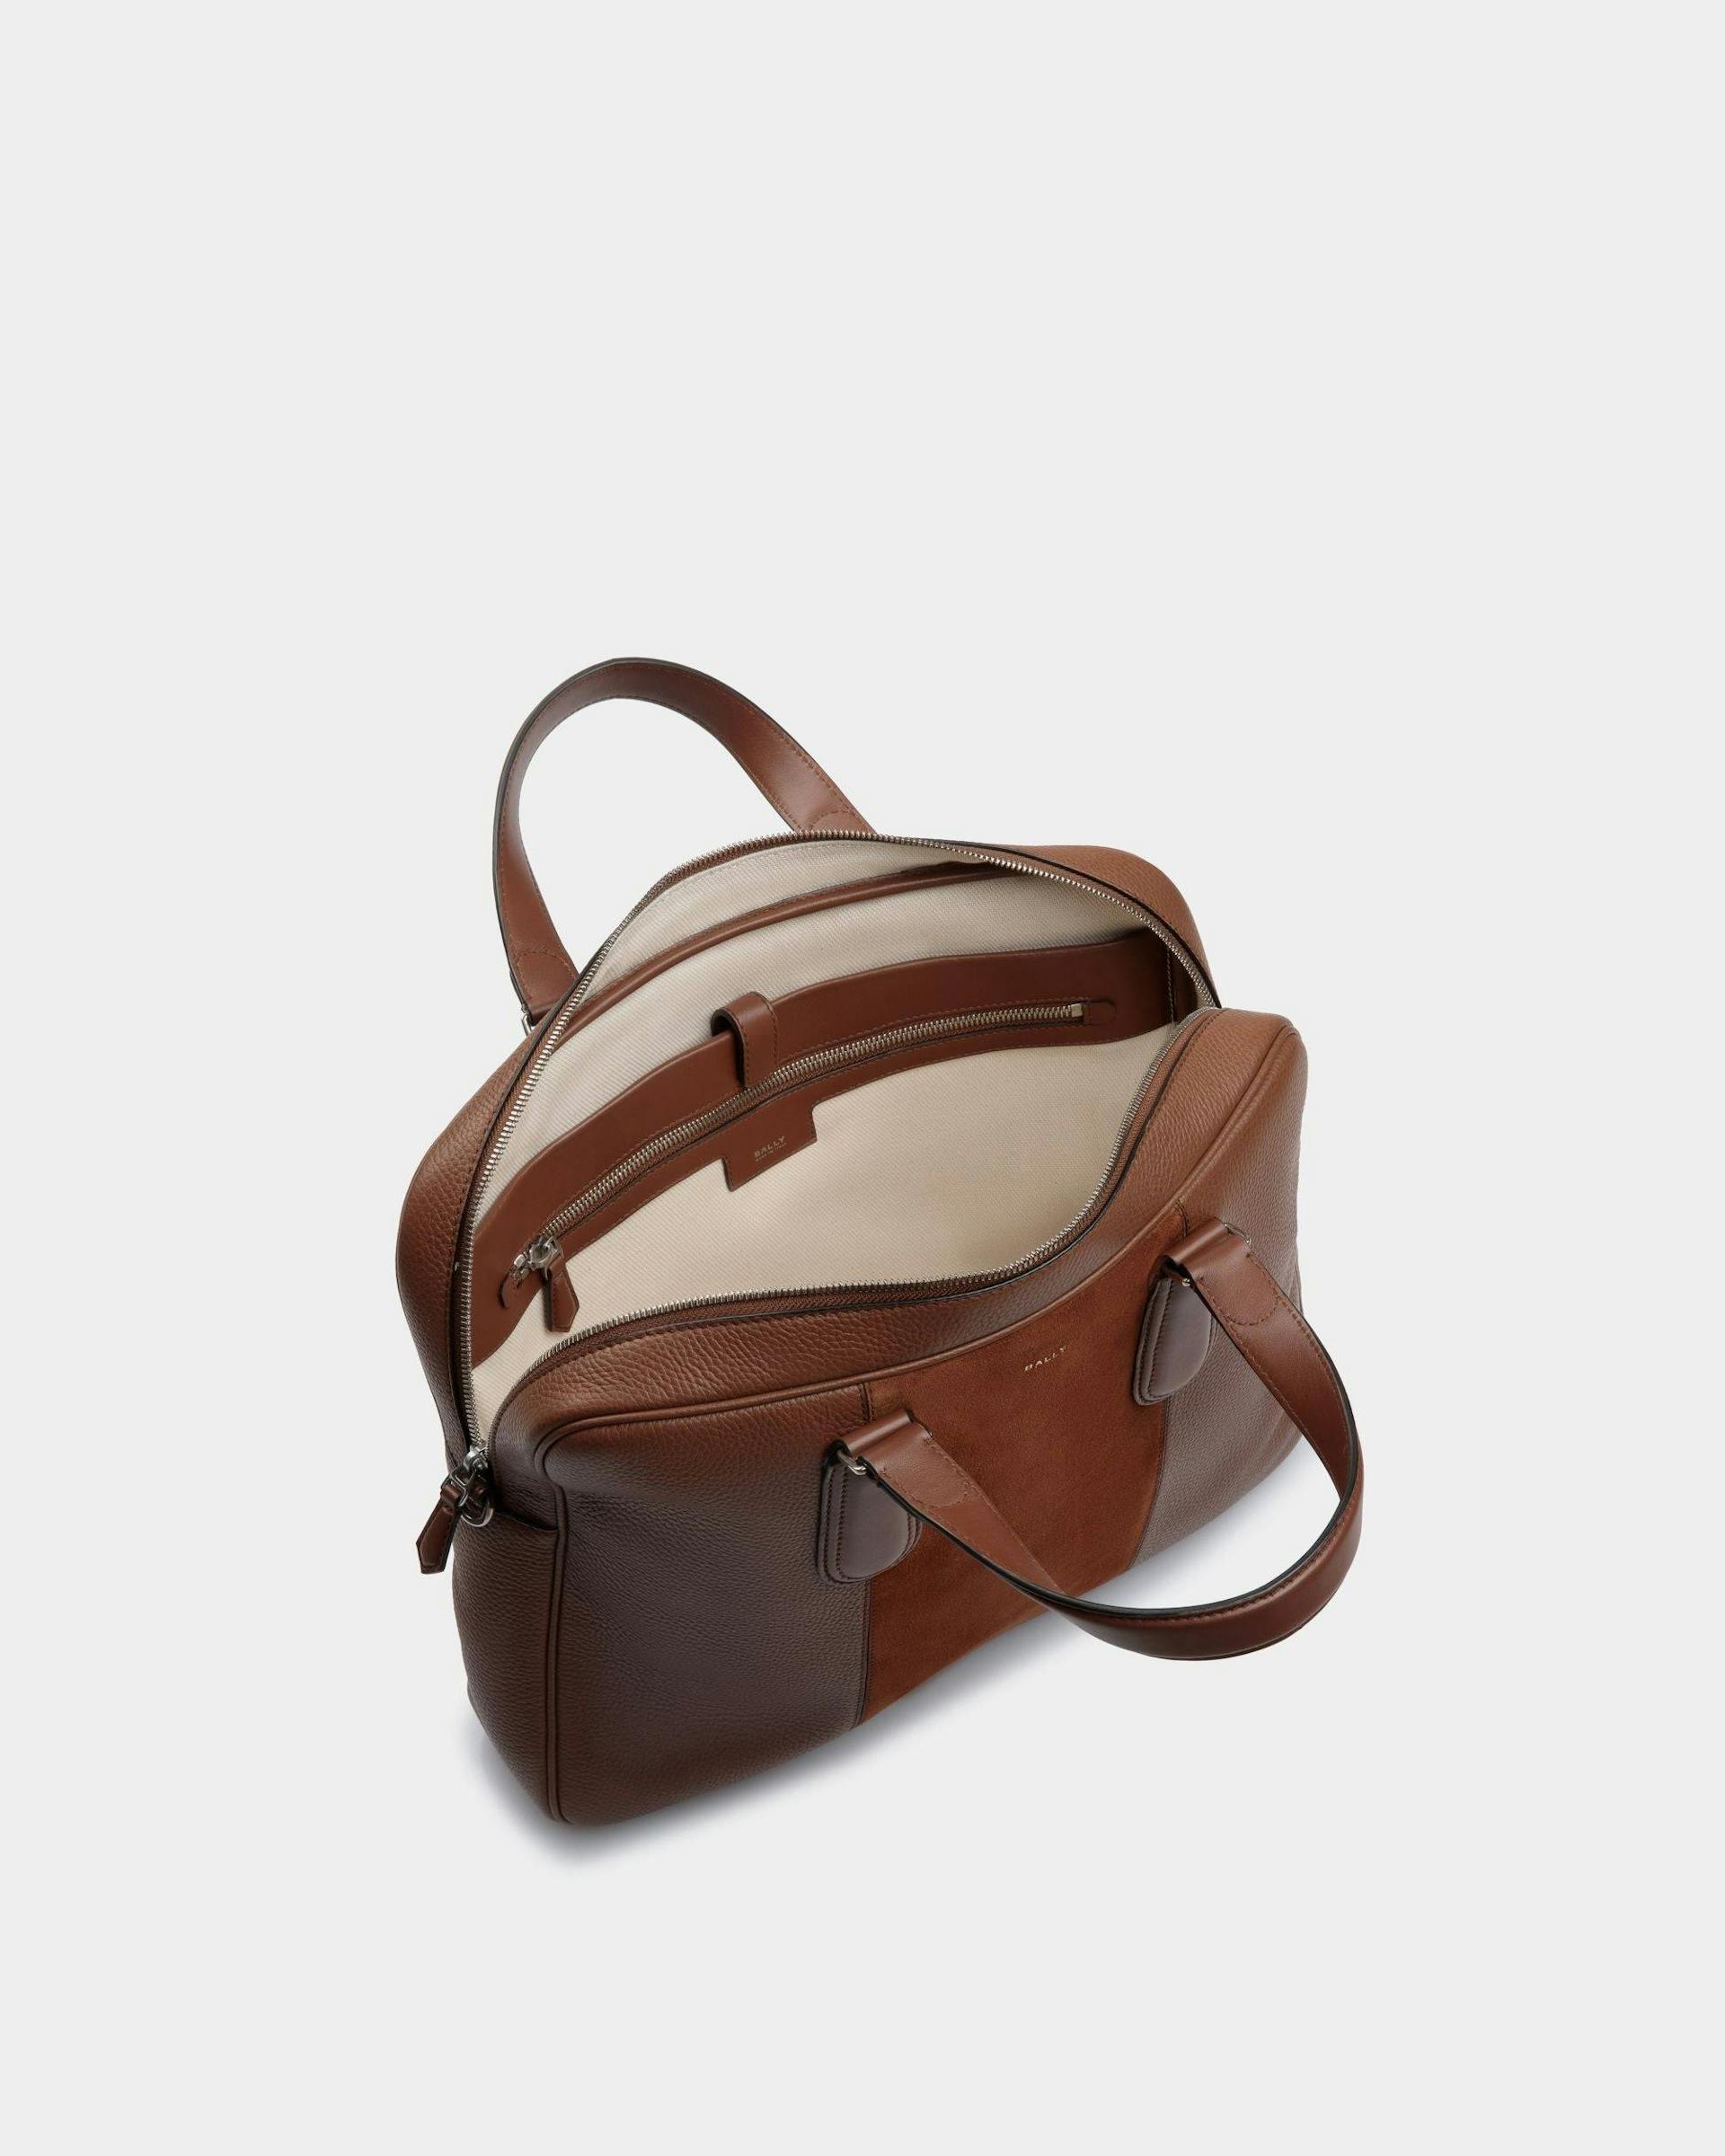 Men's Spin Briefcase in Brown Leather | Bally | Still Life Open / Inside